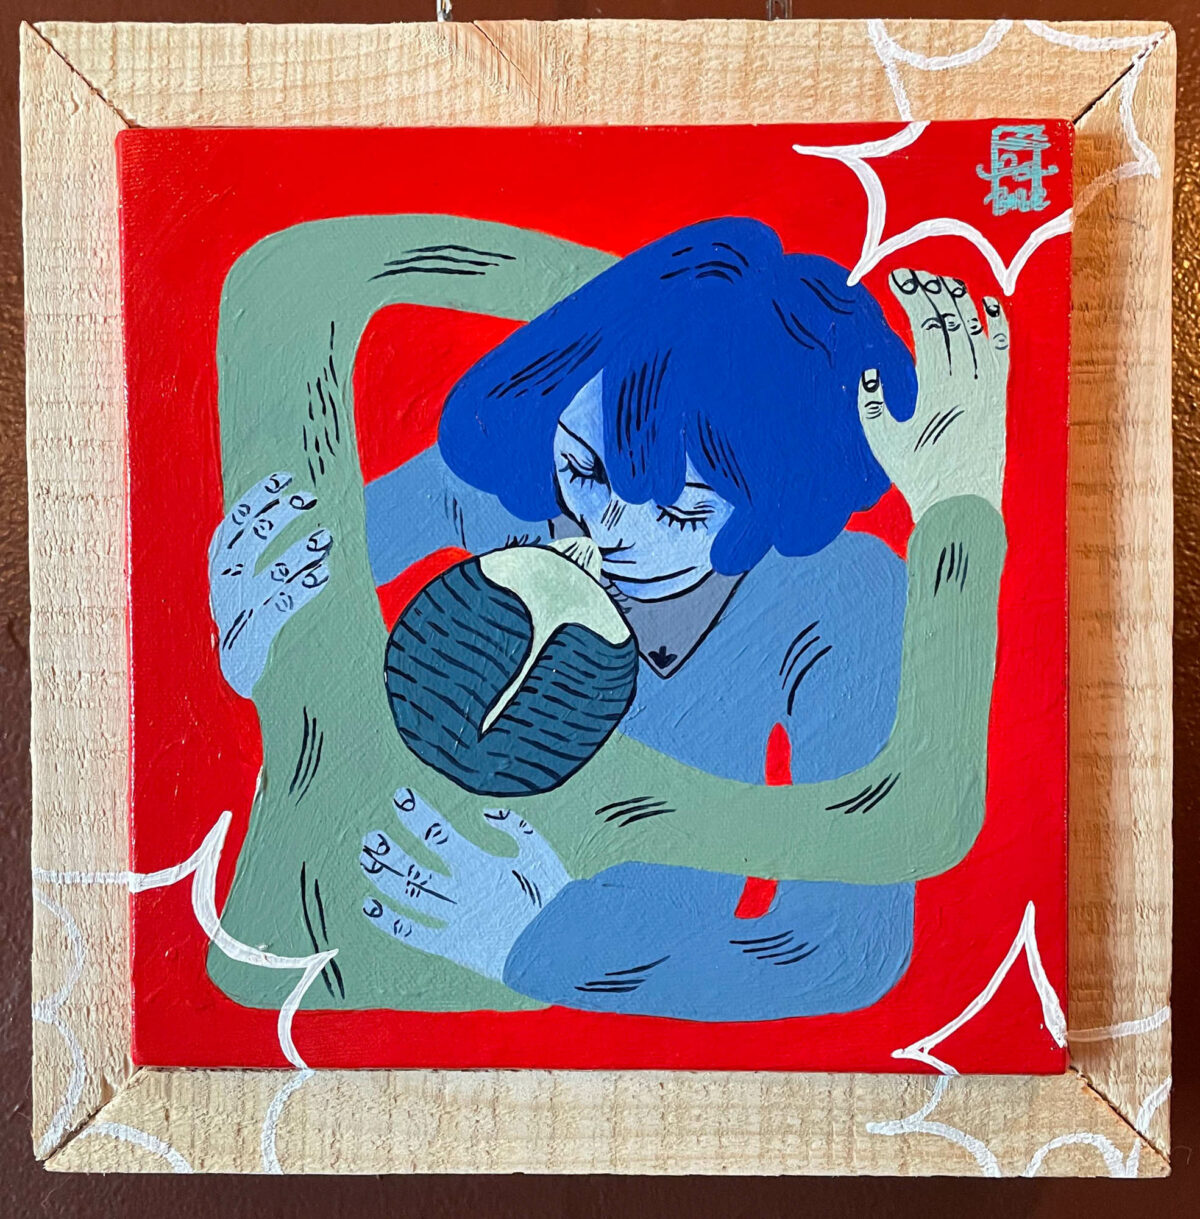 framed painting of two blue figures embracing on a red background